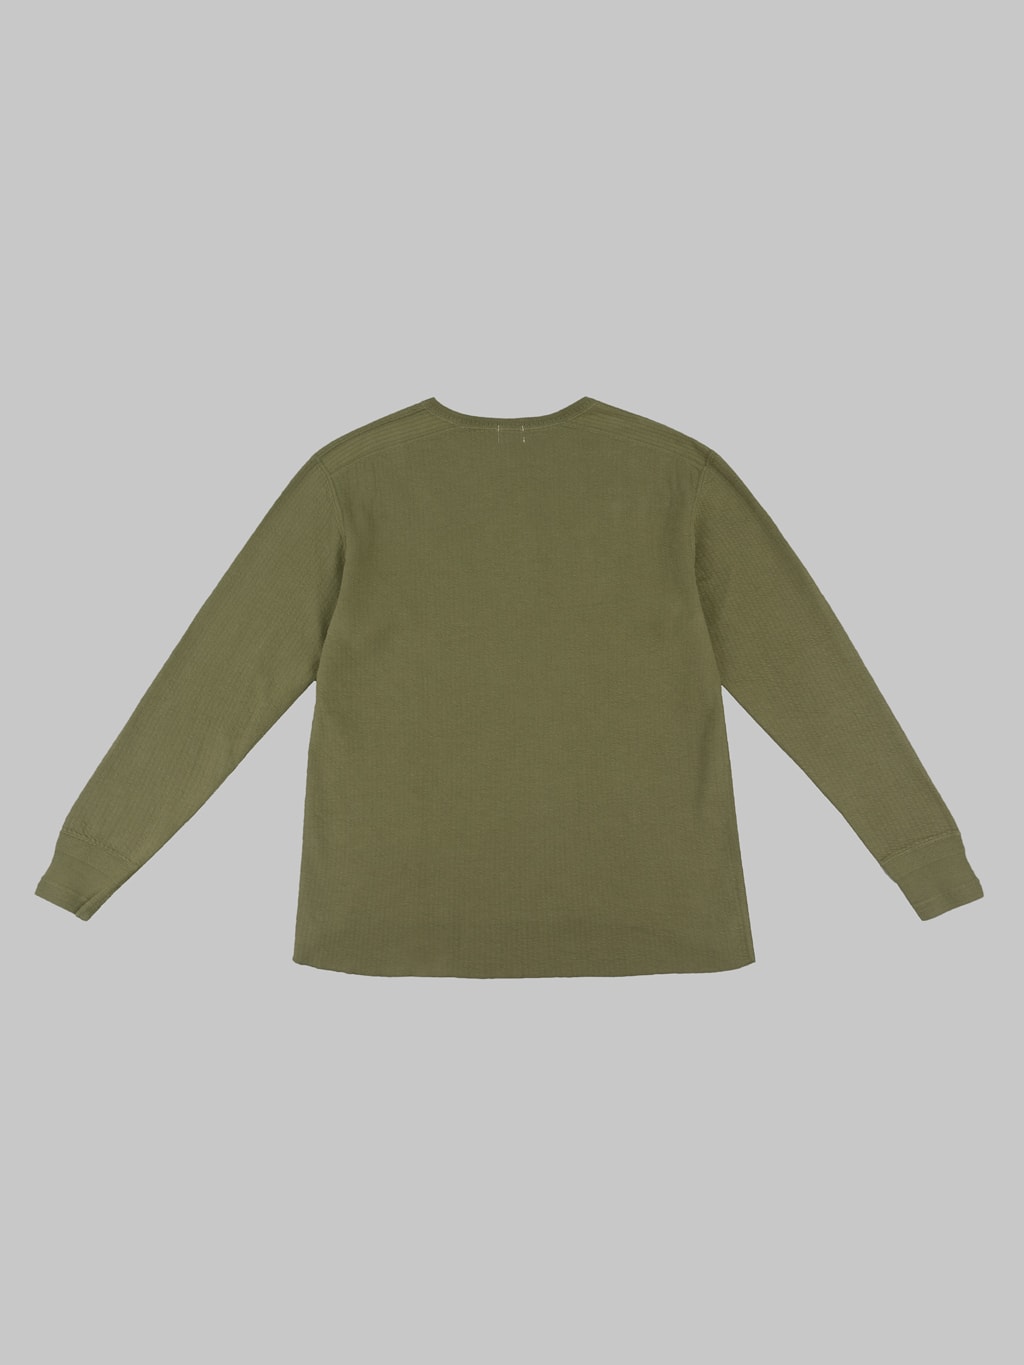 Loop Weft Double Face Jacquard crewneck Thermal army olive soft